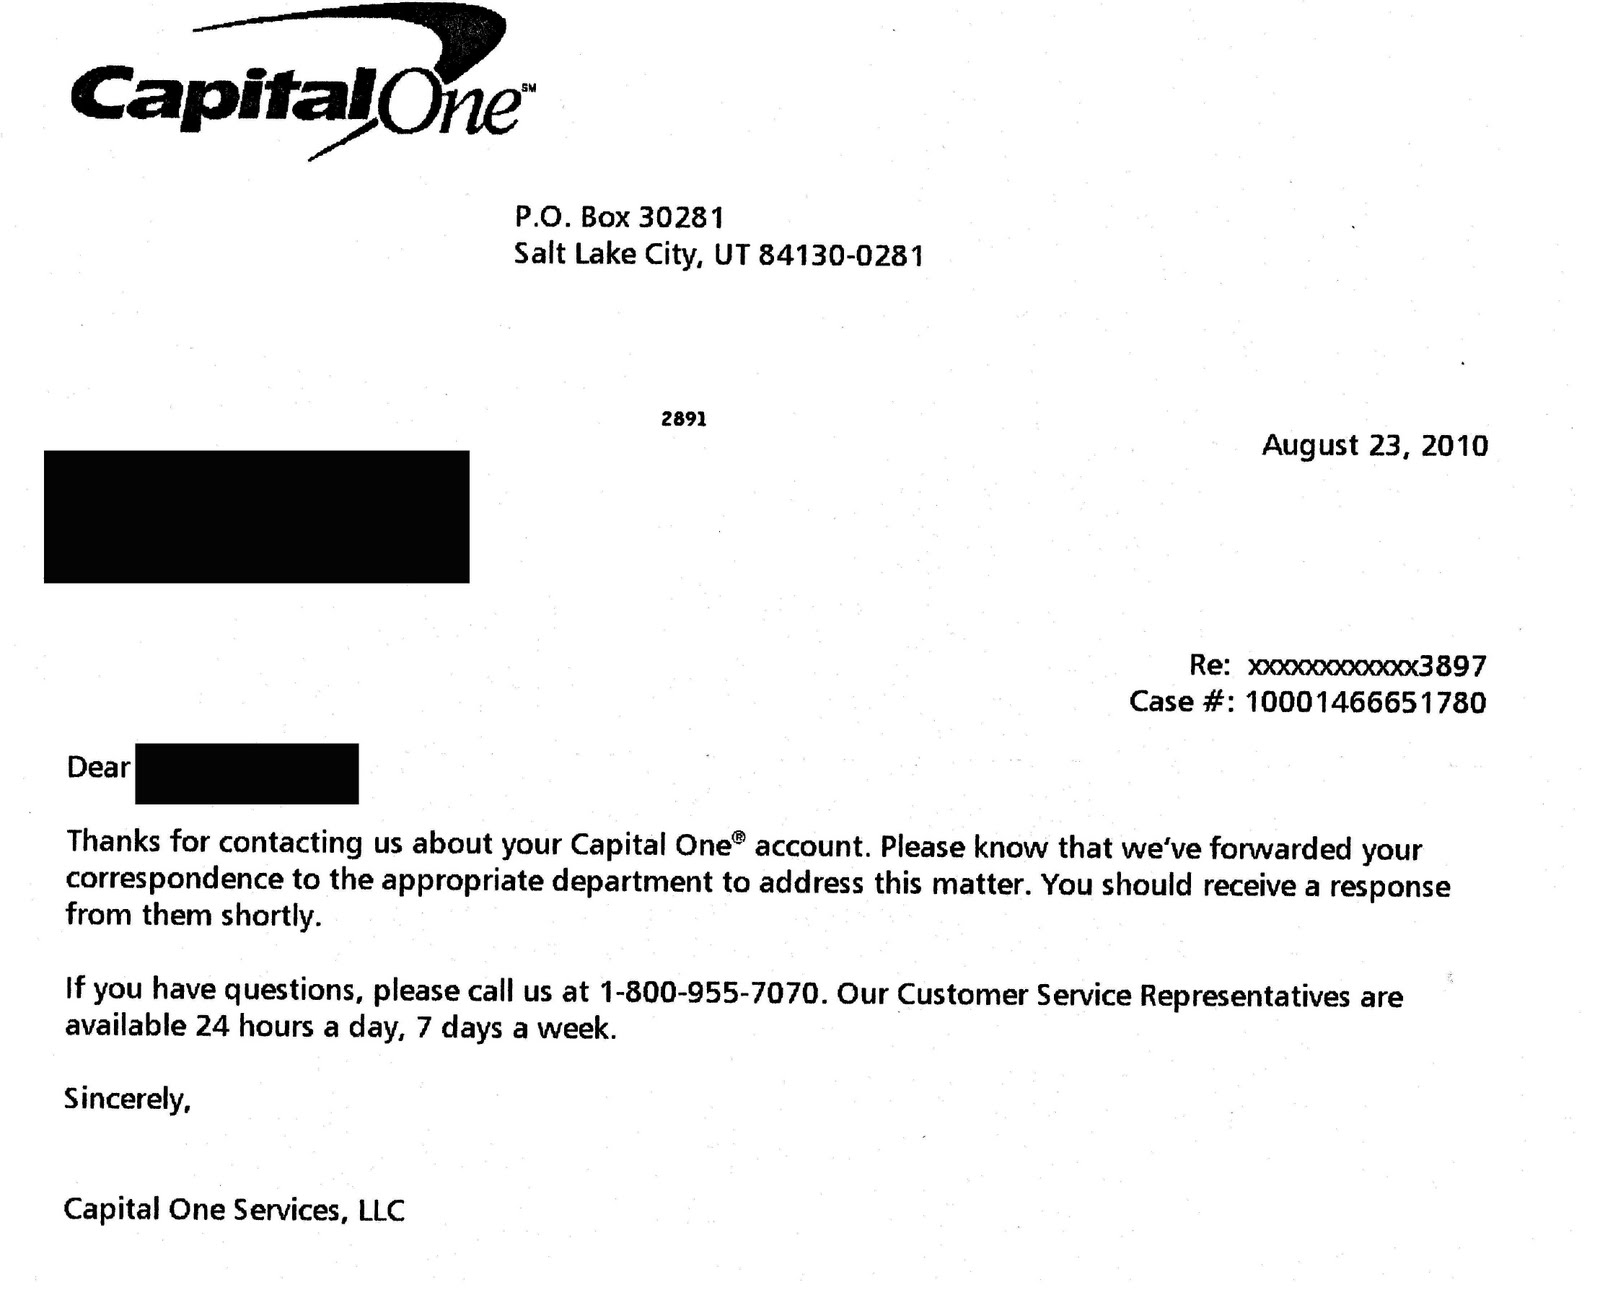 My fight with Capital One Credit card